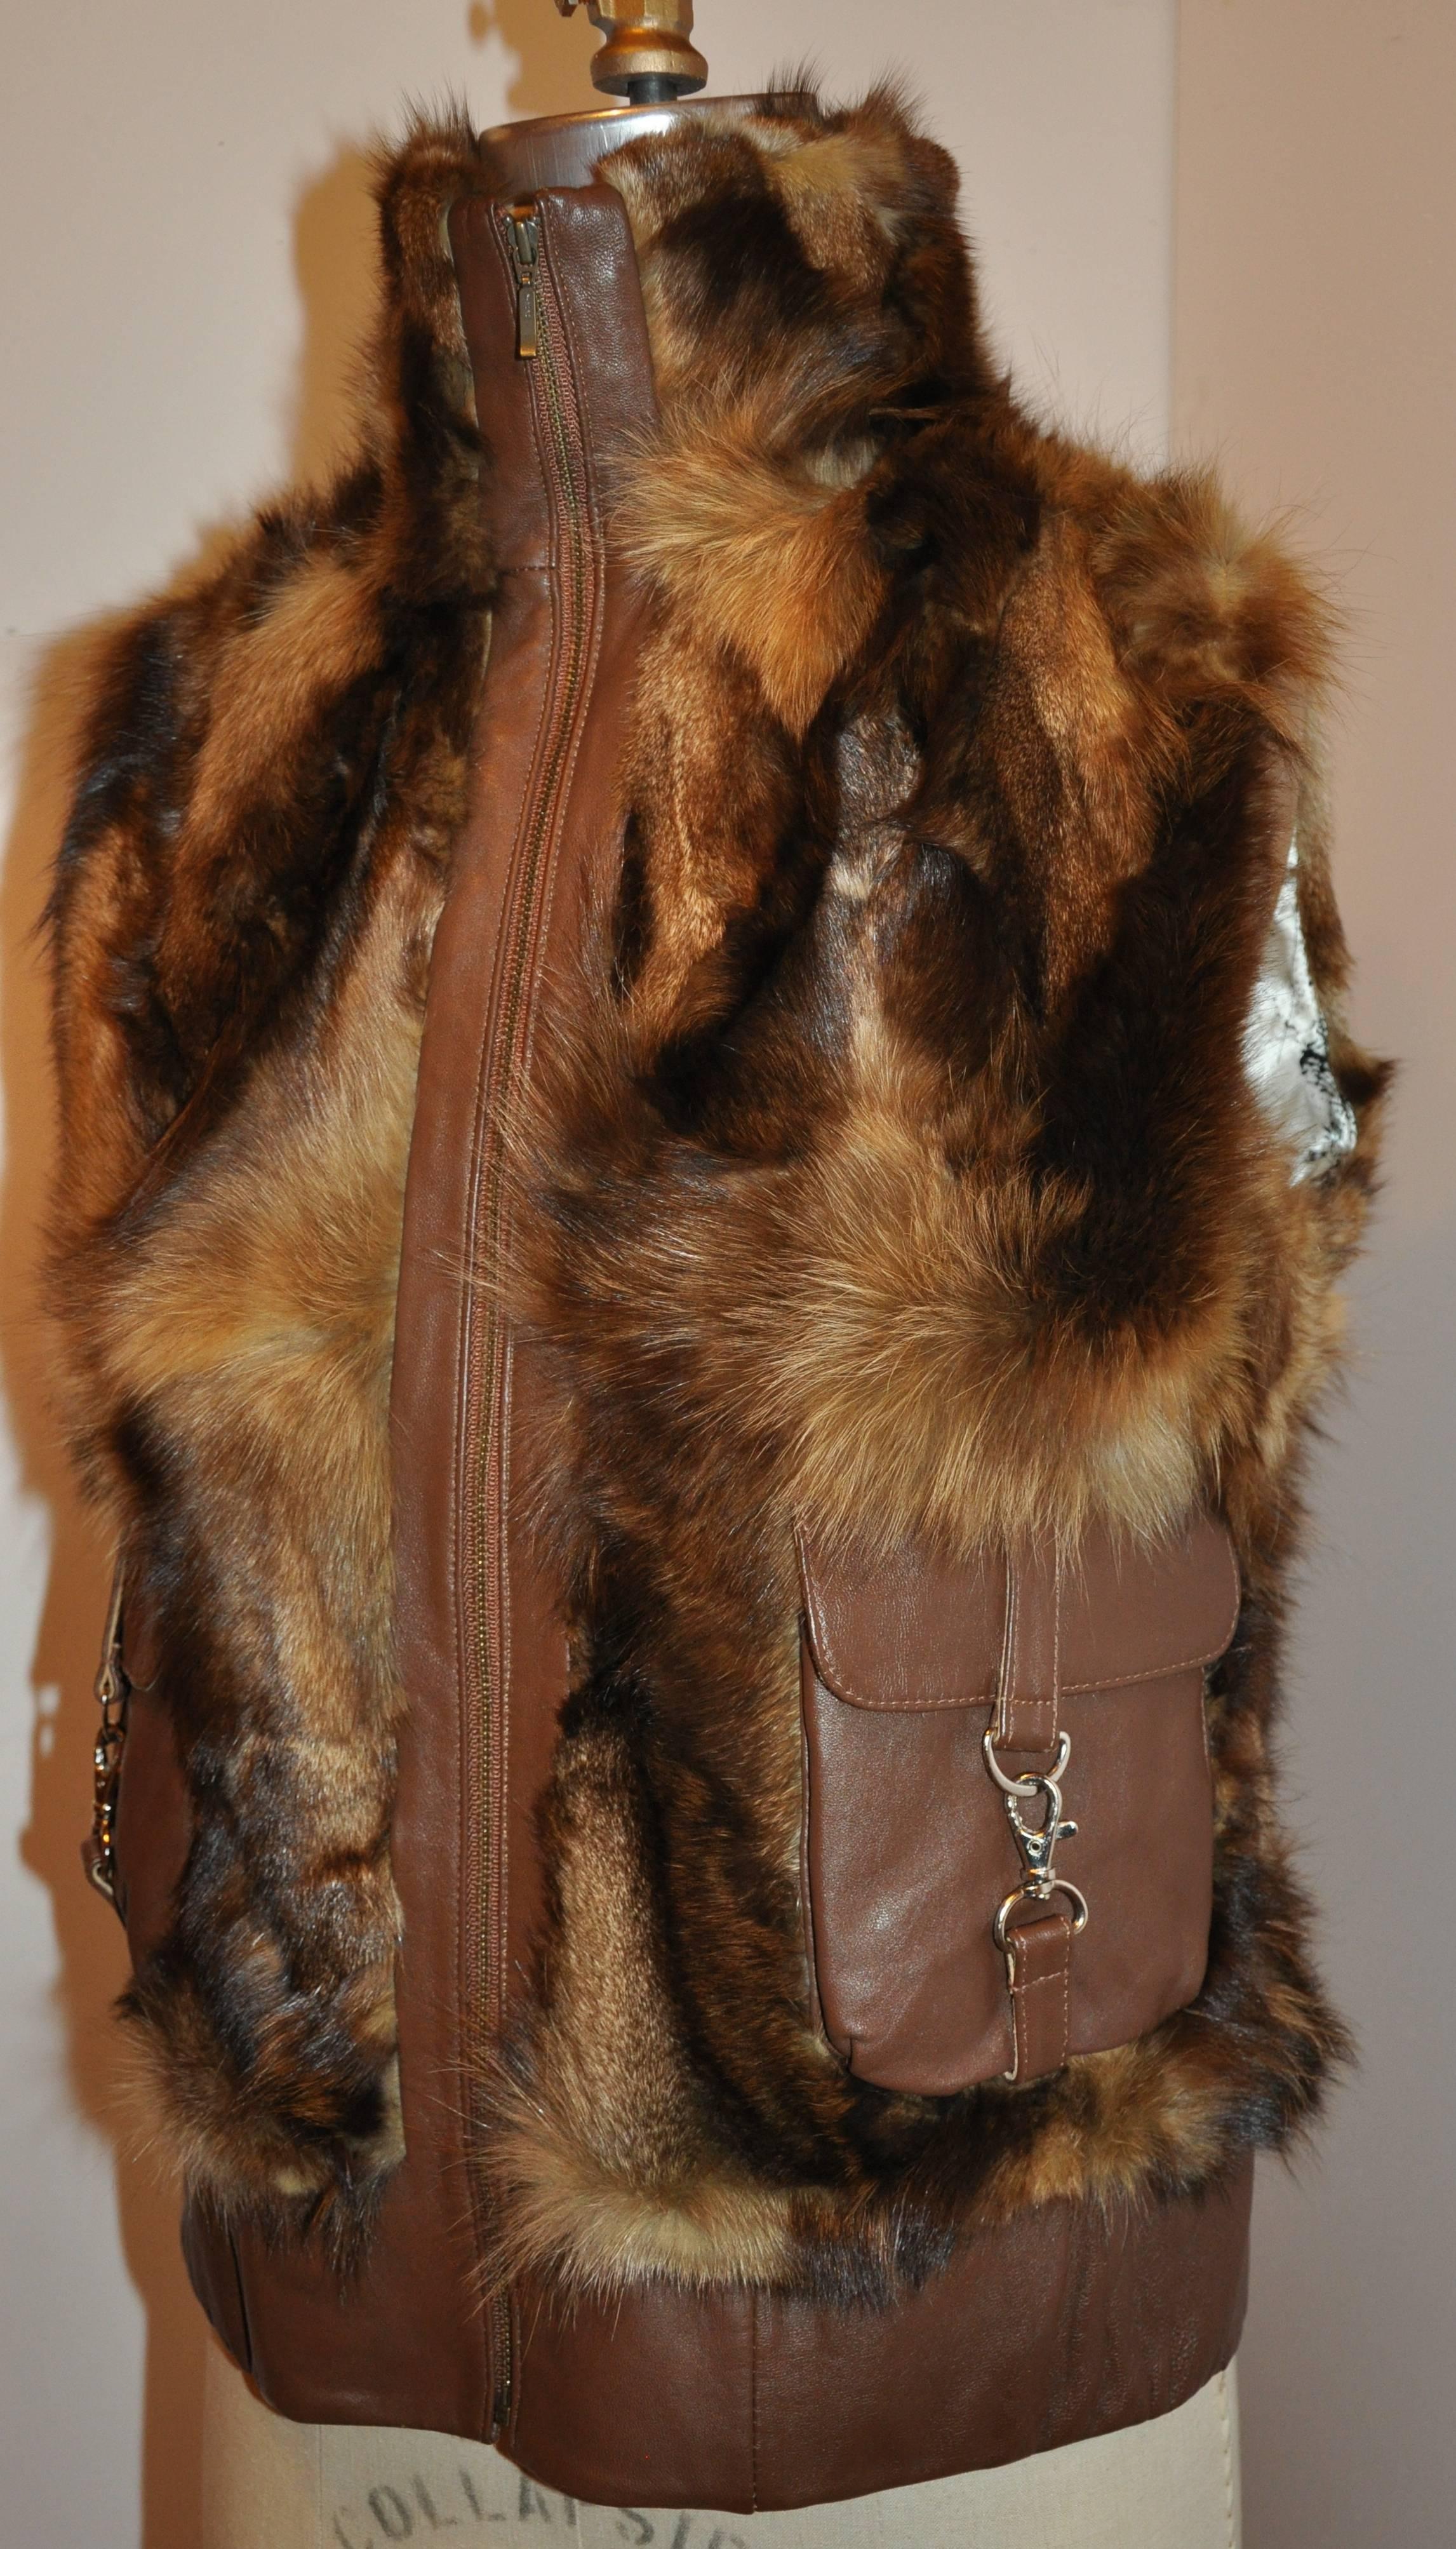         High collar zippered front fur vest is accented with brown leather throughout. The high collar measures 4